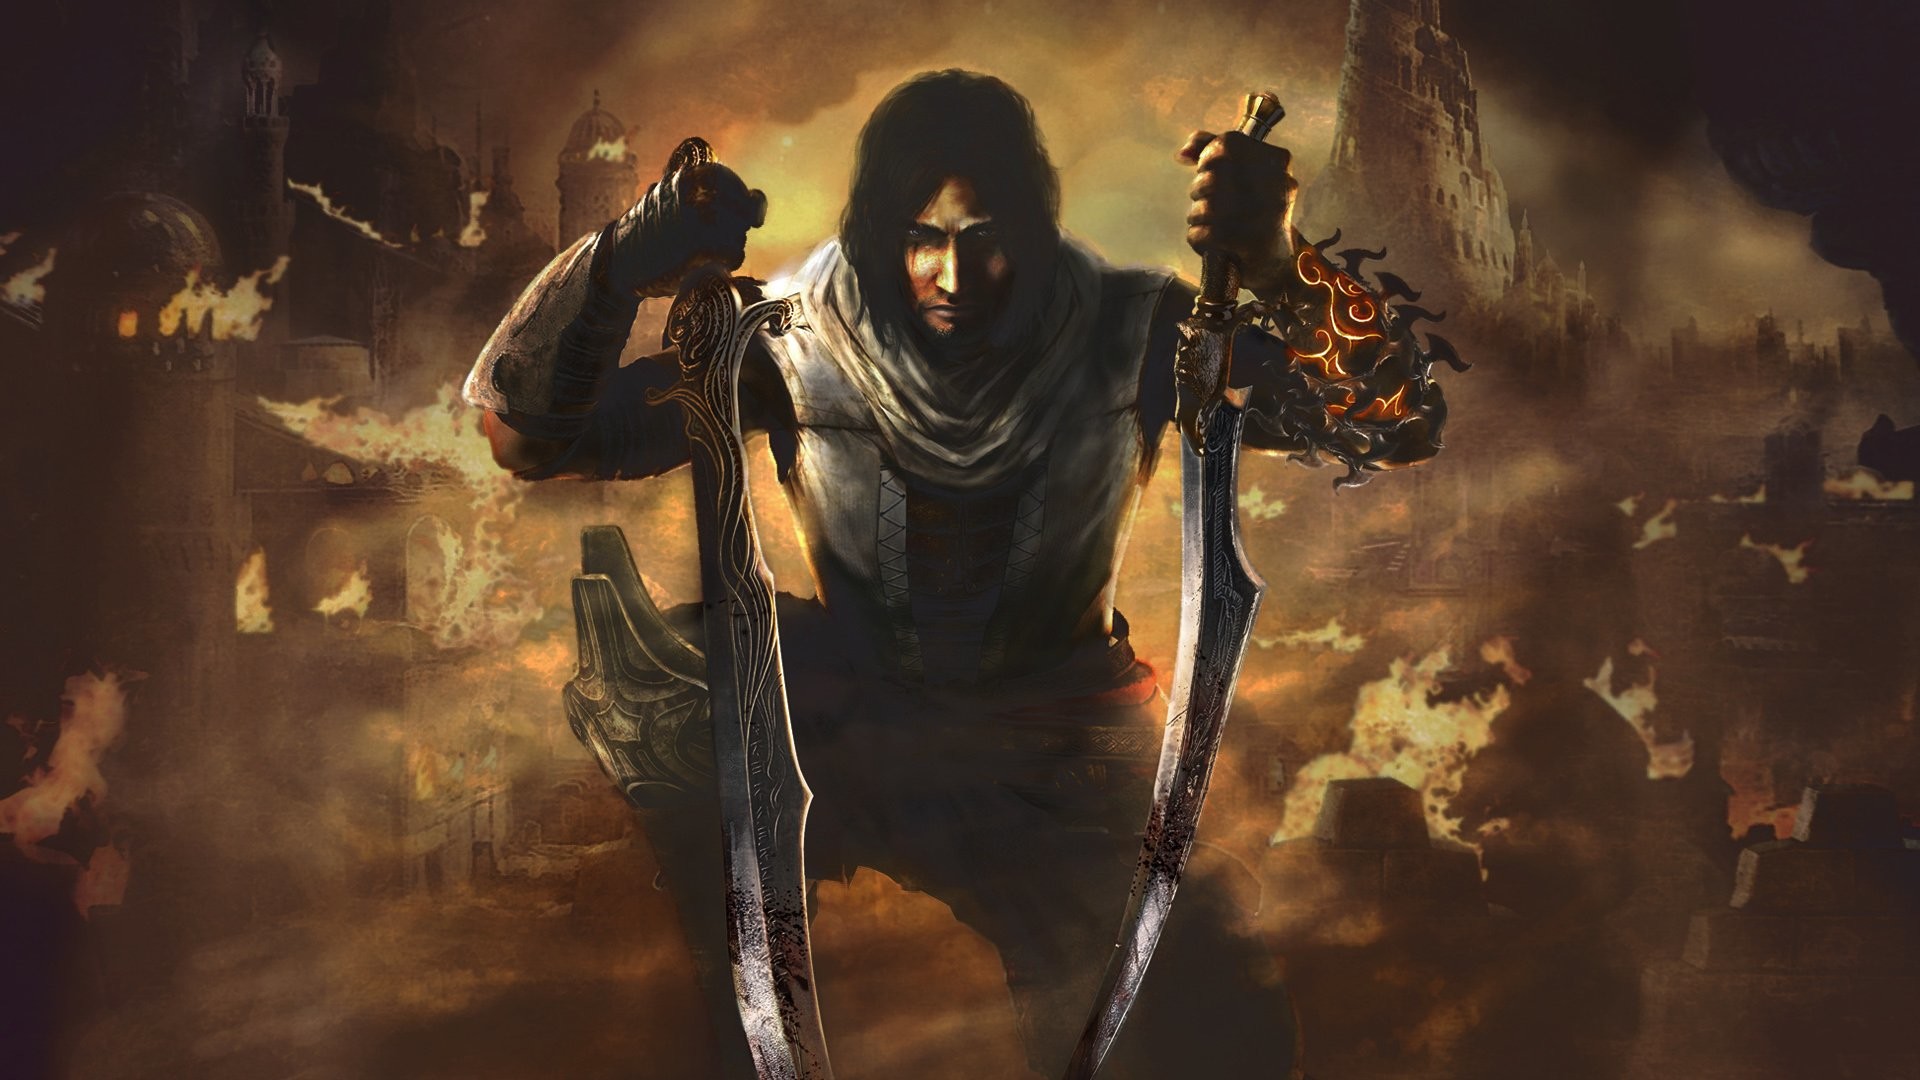 1920x1080 Video Game - Prince Of Persia Wallpaper